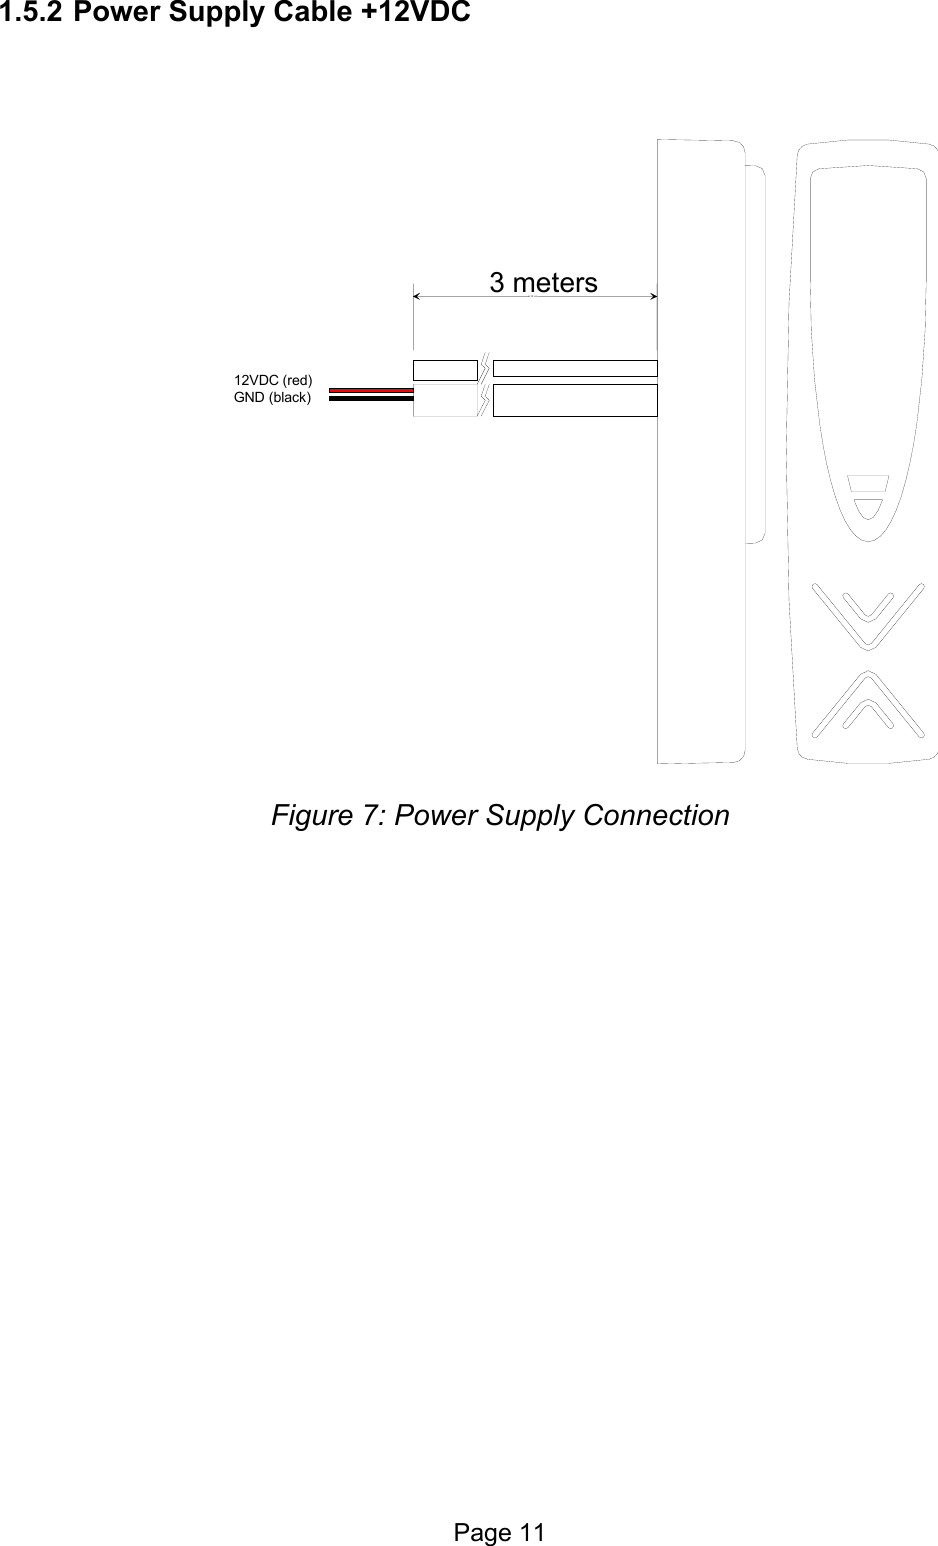  1.5.2 Power Supply Cable +12VDC  6,10 cm3 meters12VDC (red)GND (black)Figure 7: Power Supply Connection Page 11 